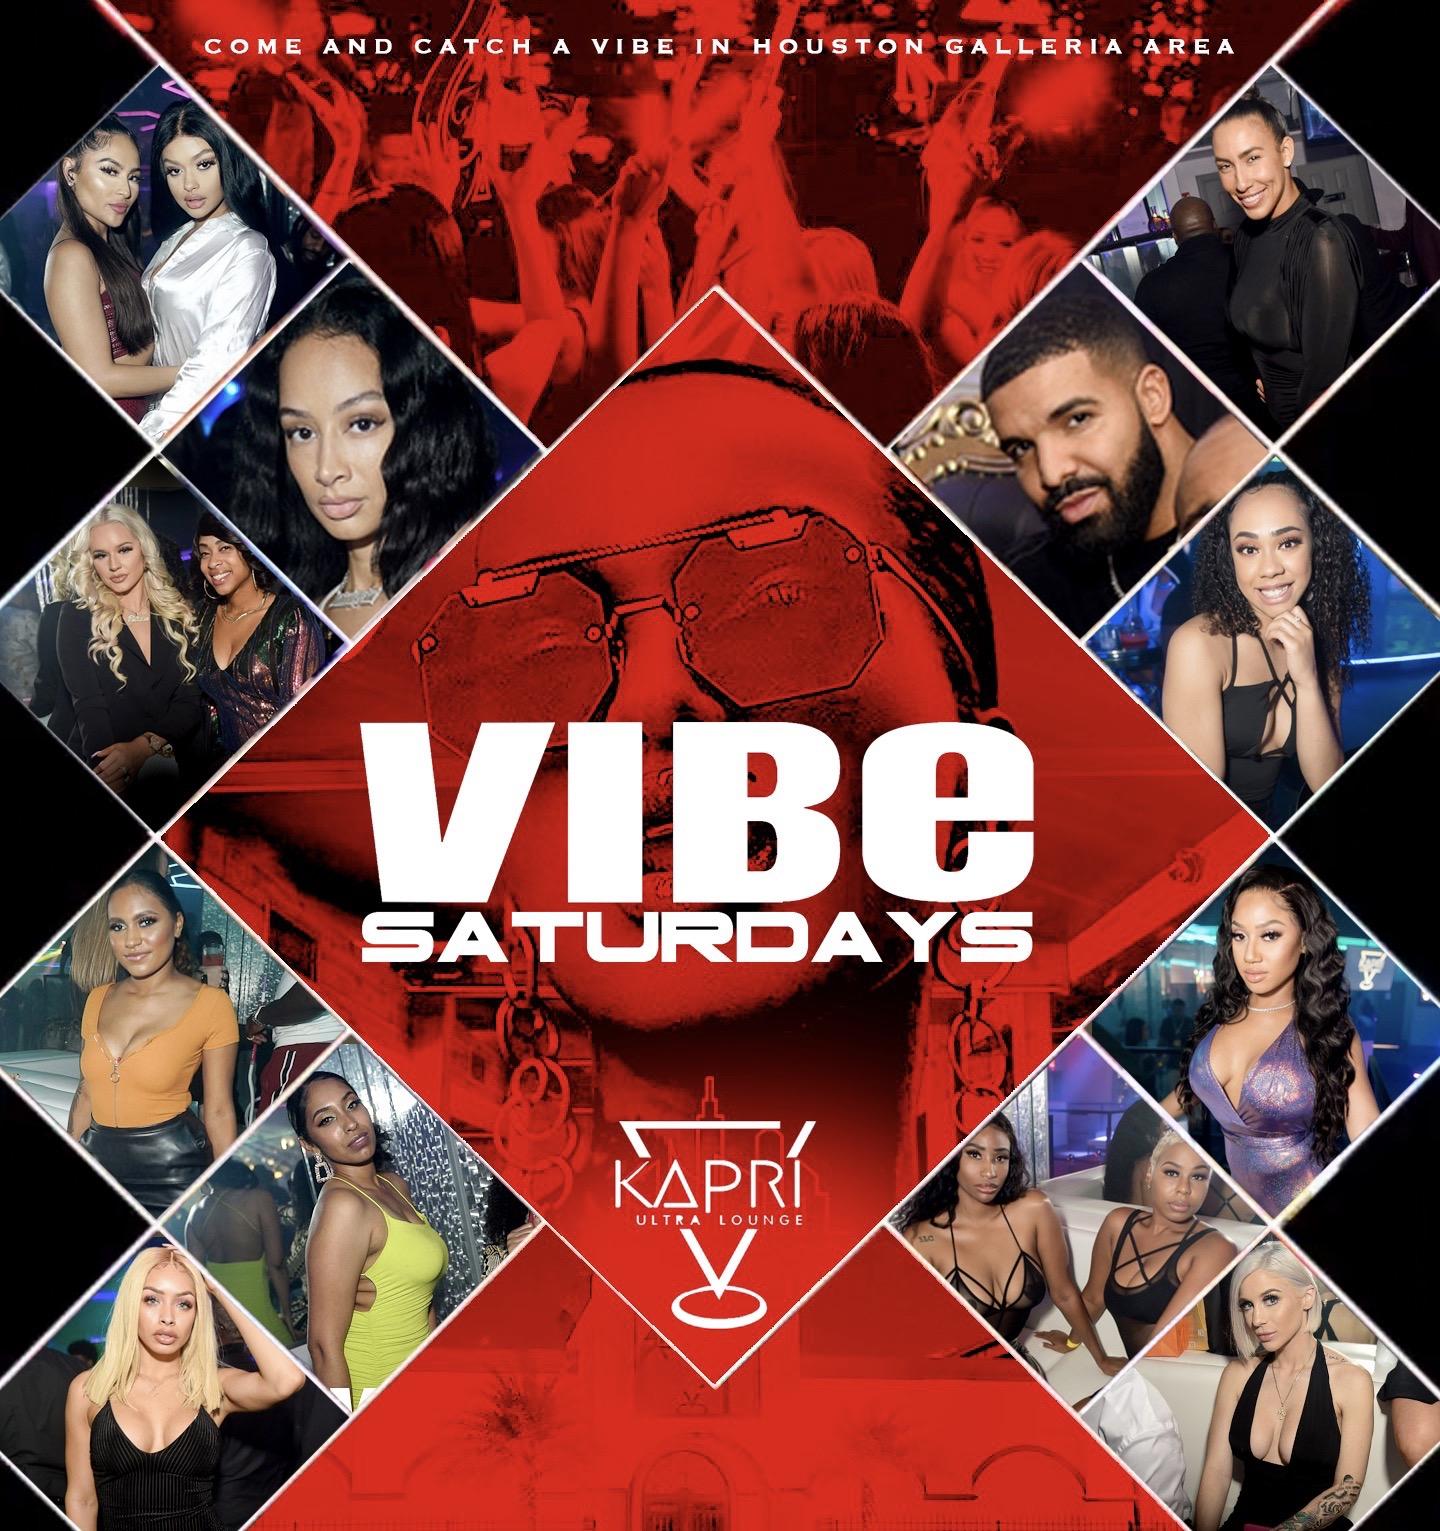 VIBE SATURDAYS AT KAPRI ULTRA LOUNGE | Go DJ HiC Indmix |RSVP Now For Cover | Section Info: 832.993.4226